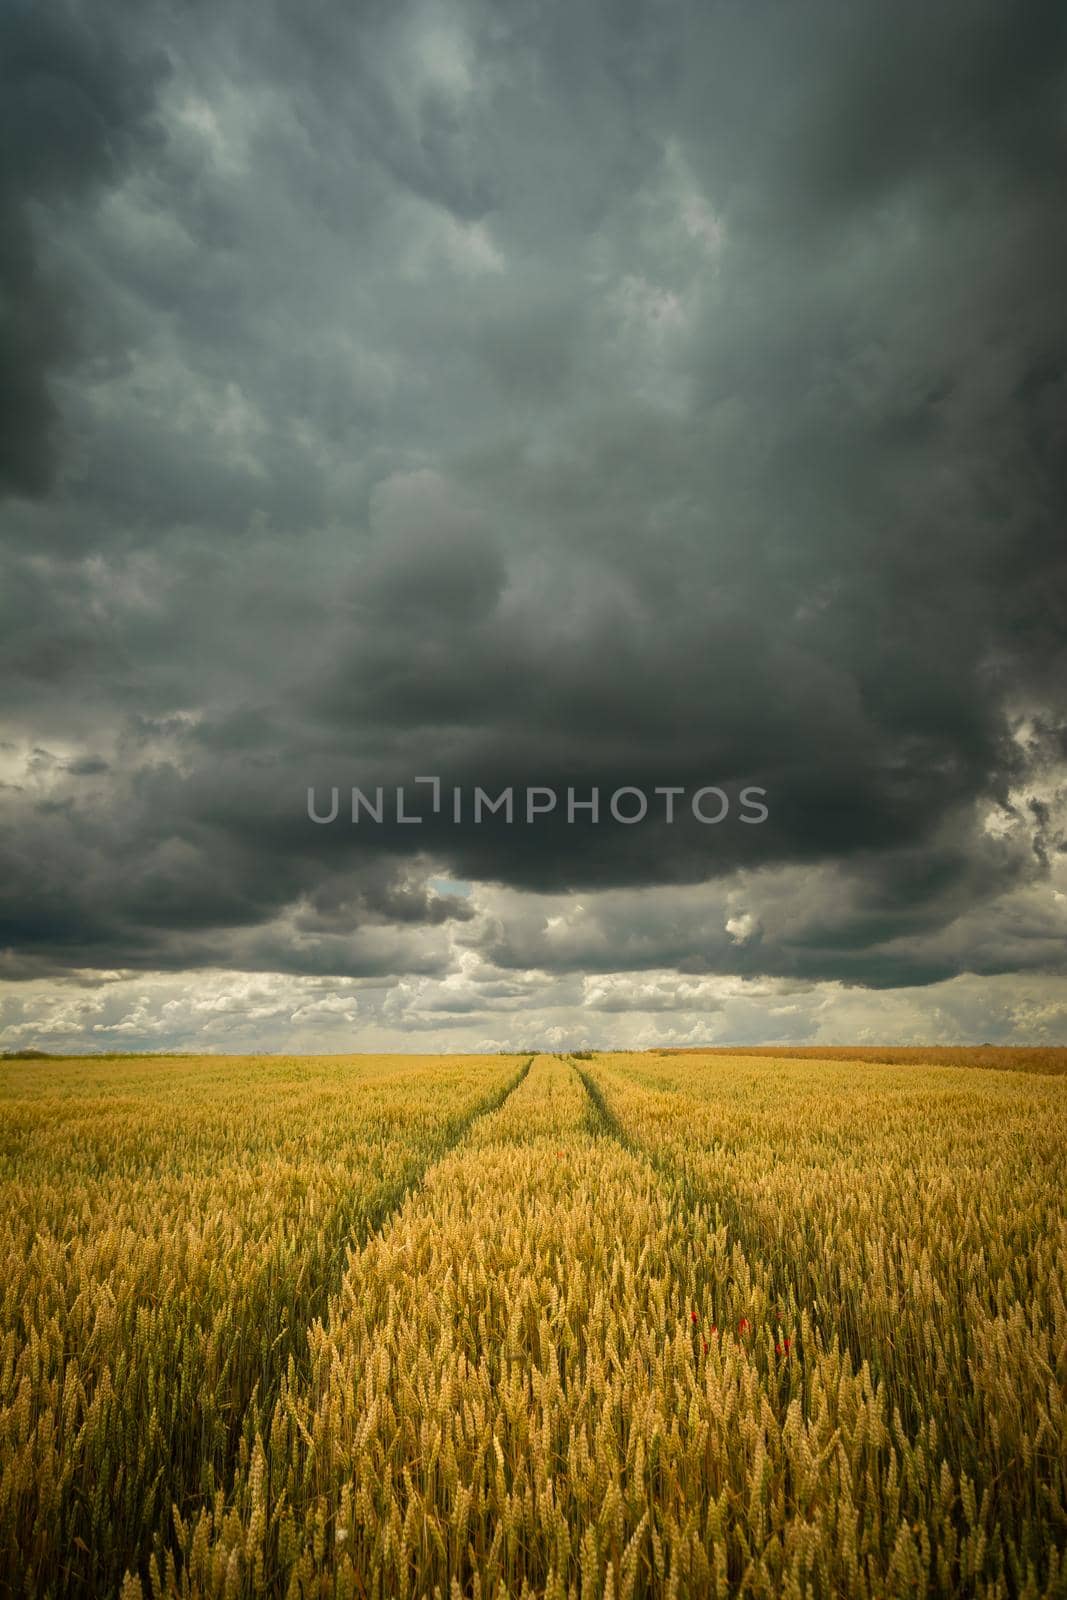 Wheel tracks in wheat and storm sky, rural view